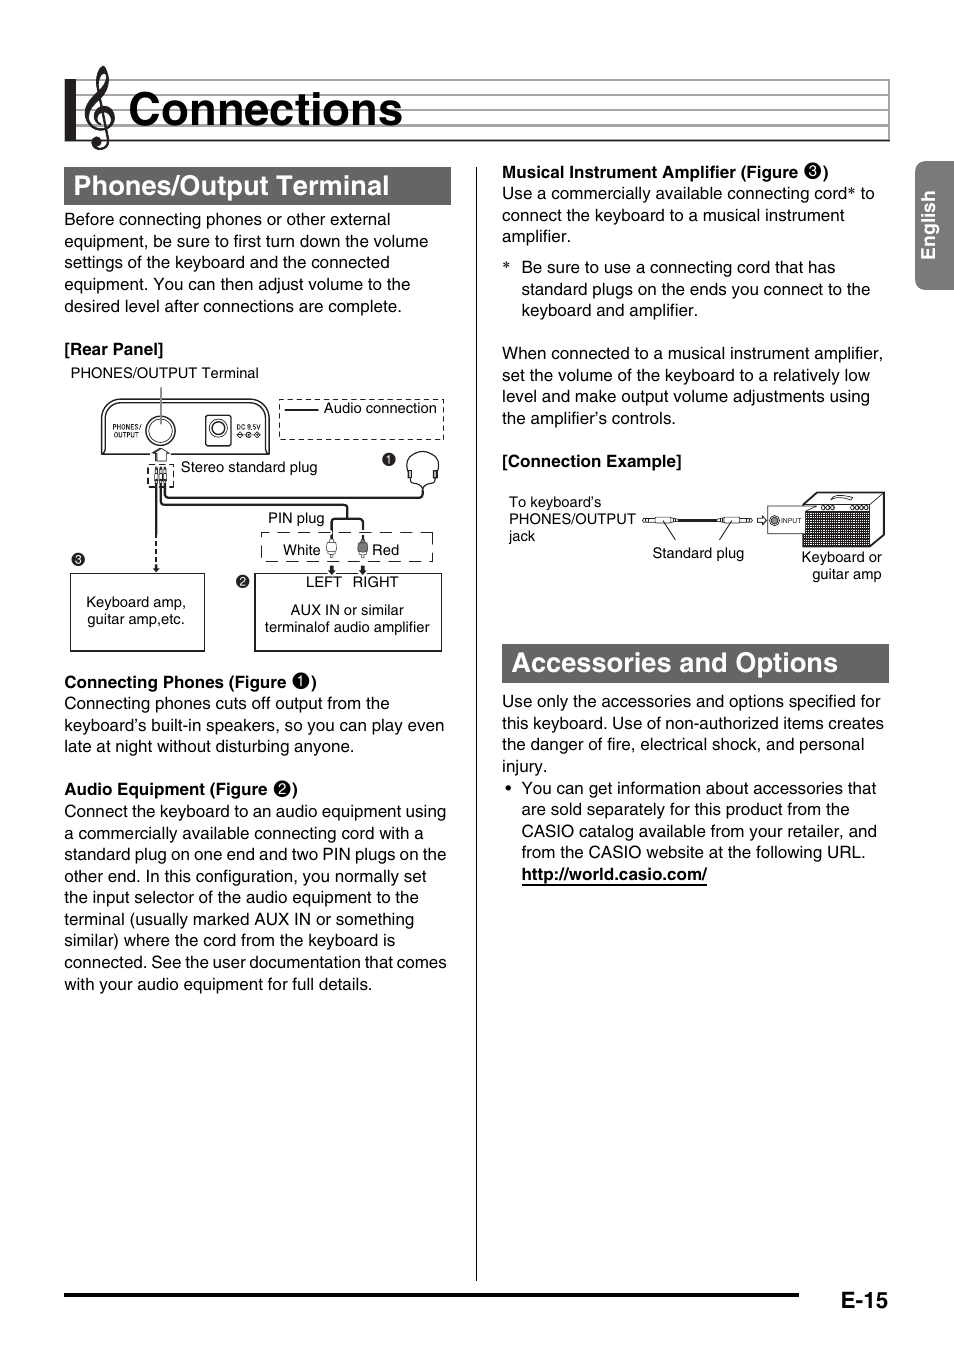 Connections, Phones/output terminal, Accessories and options | Casio CTK-245  User Manual | Page 17 / 46